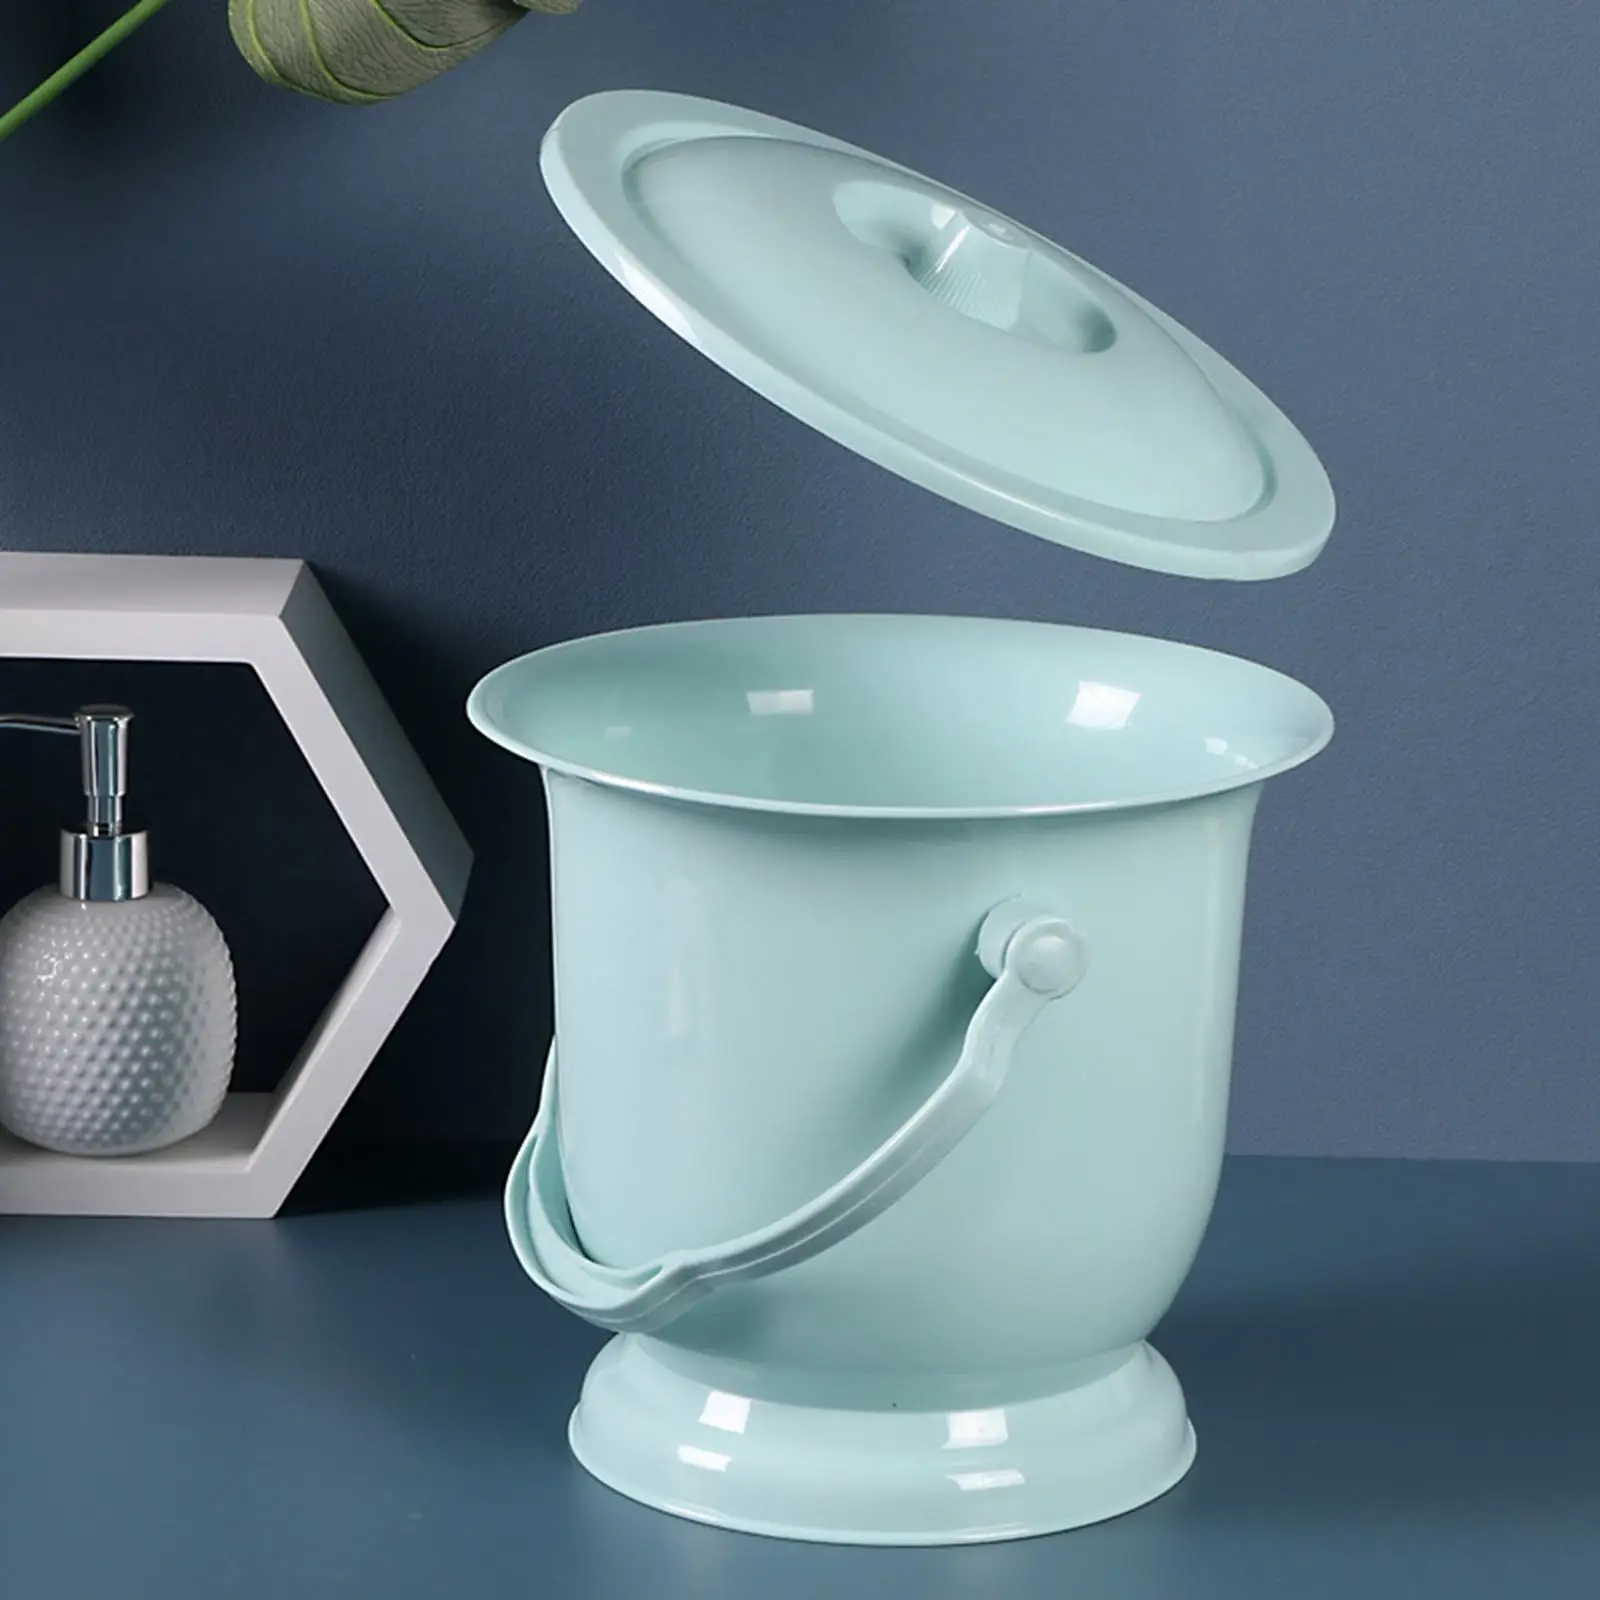 Handheld Spittoon with Lid Long Lasting Use Fashion Practical Urine Bucket Mini Toilets for Household Women Bedroom Female Male